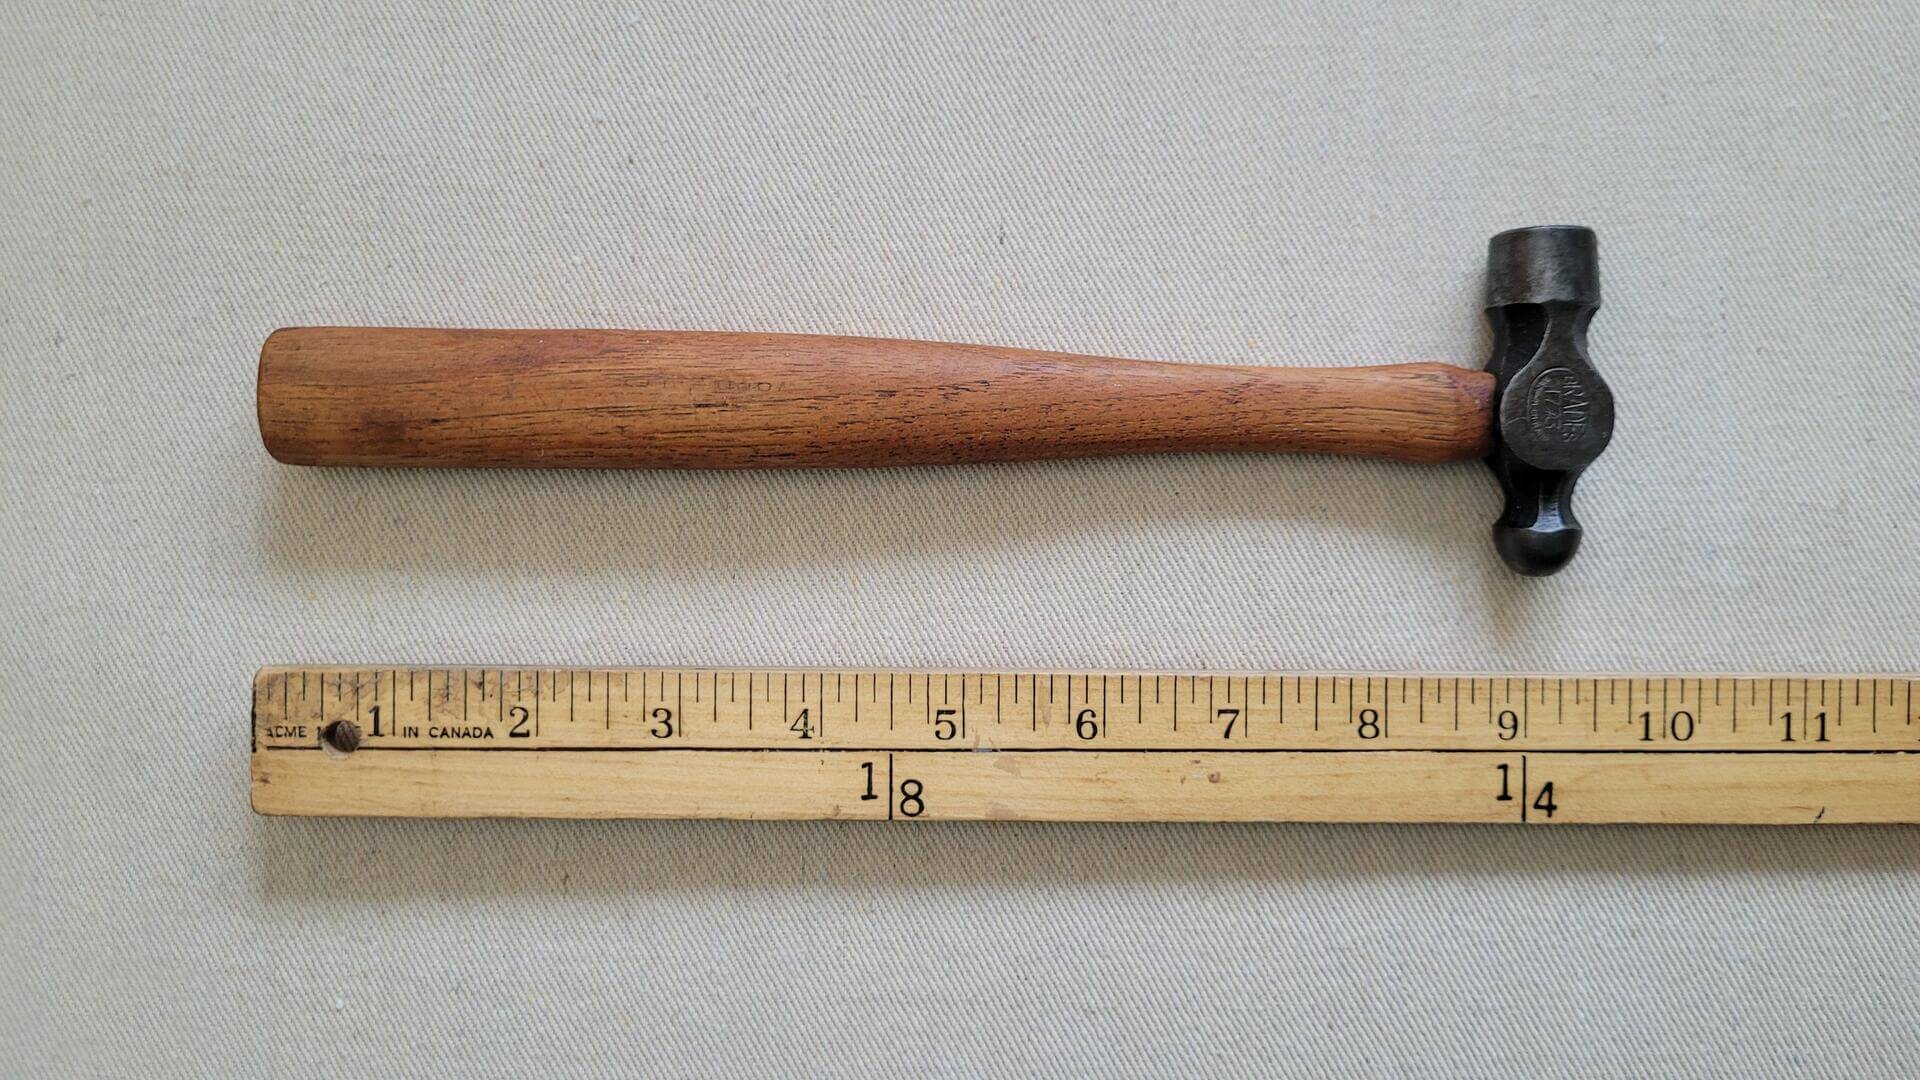 Brades & Co No 1773 ball-peen 1/2lb hammer with wooden handle 9 1/2 inches in length. Made in England, William Hunt and Sons vintage machinist and engineer hammer and collectible striking hand tool